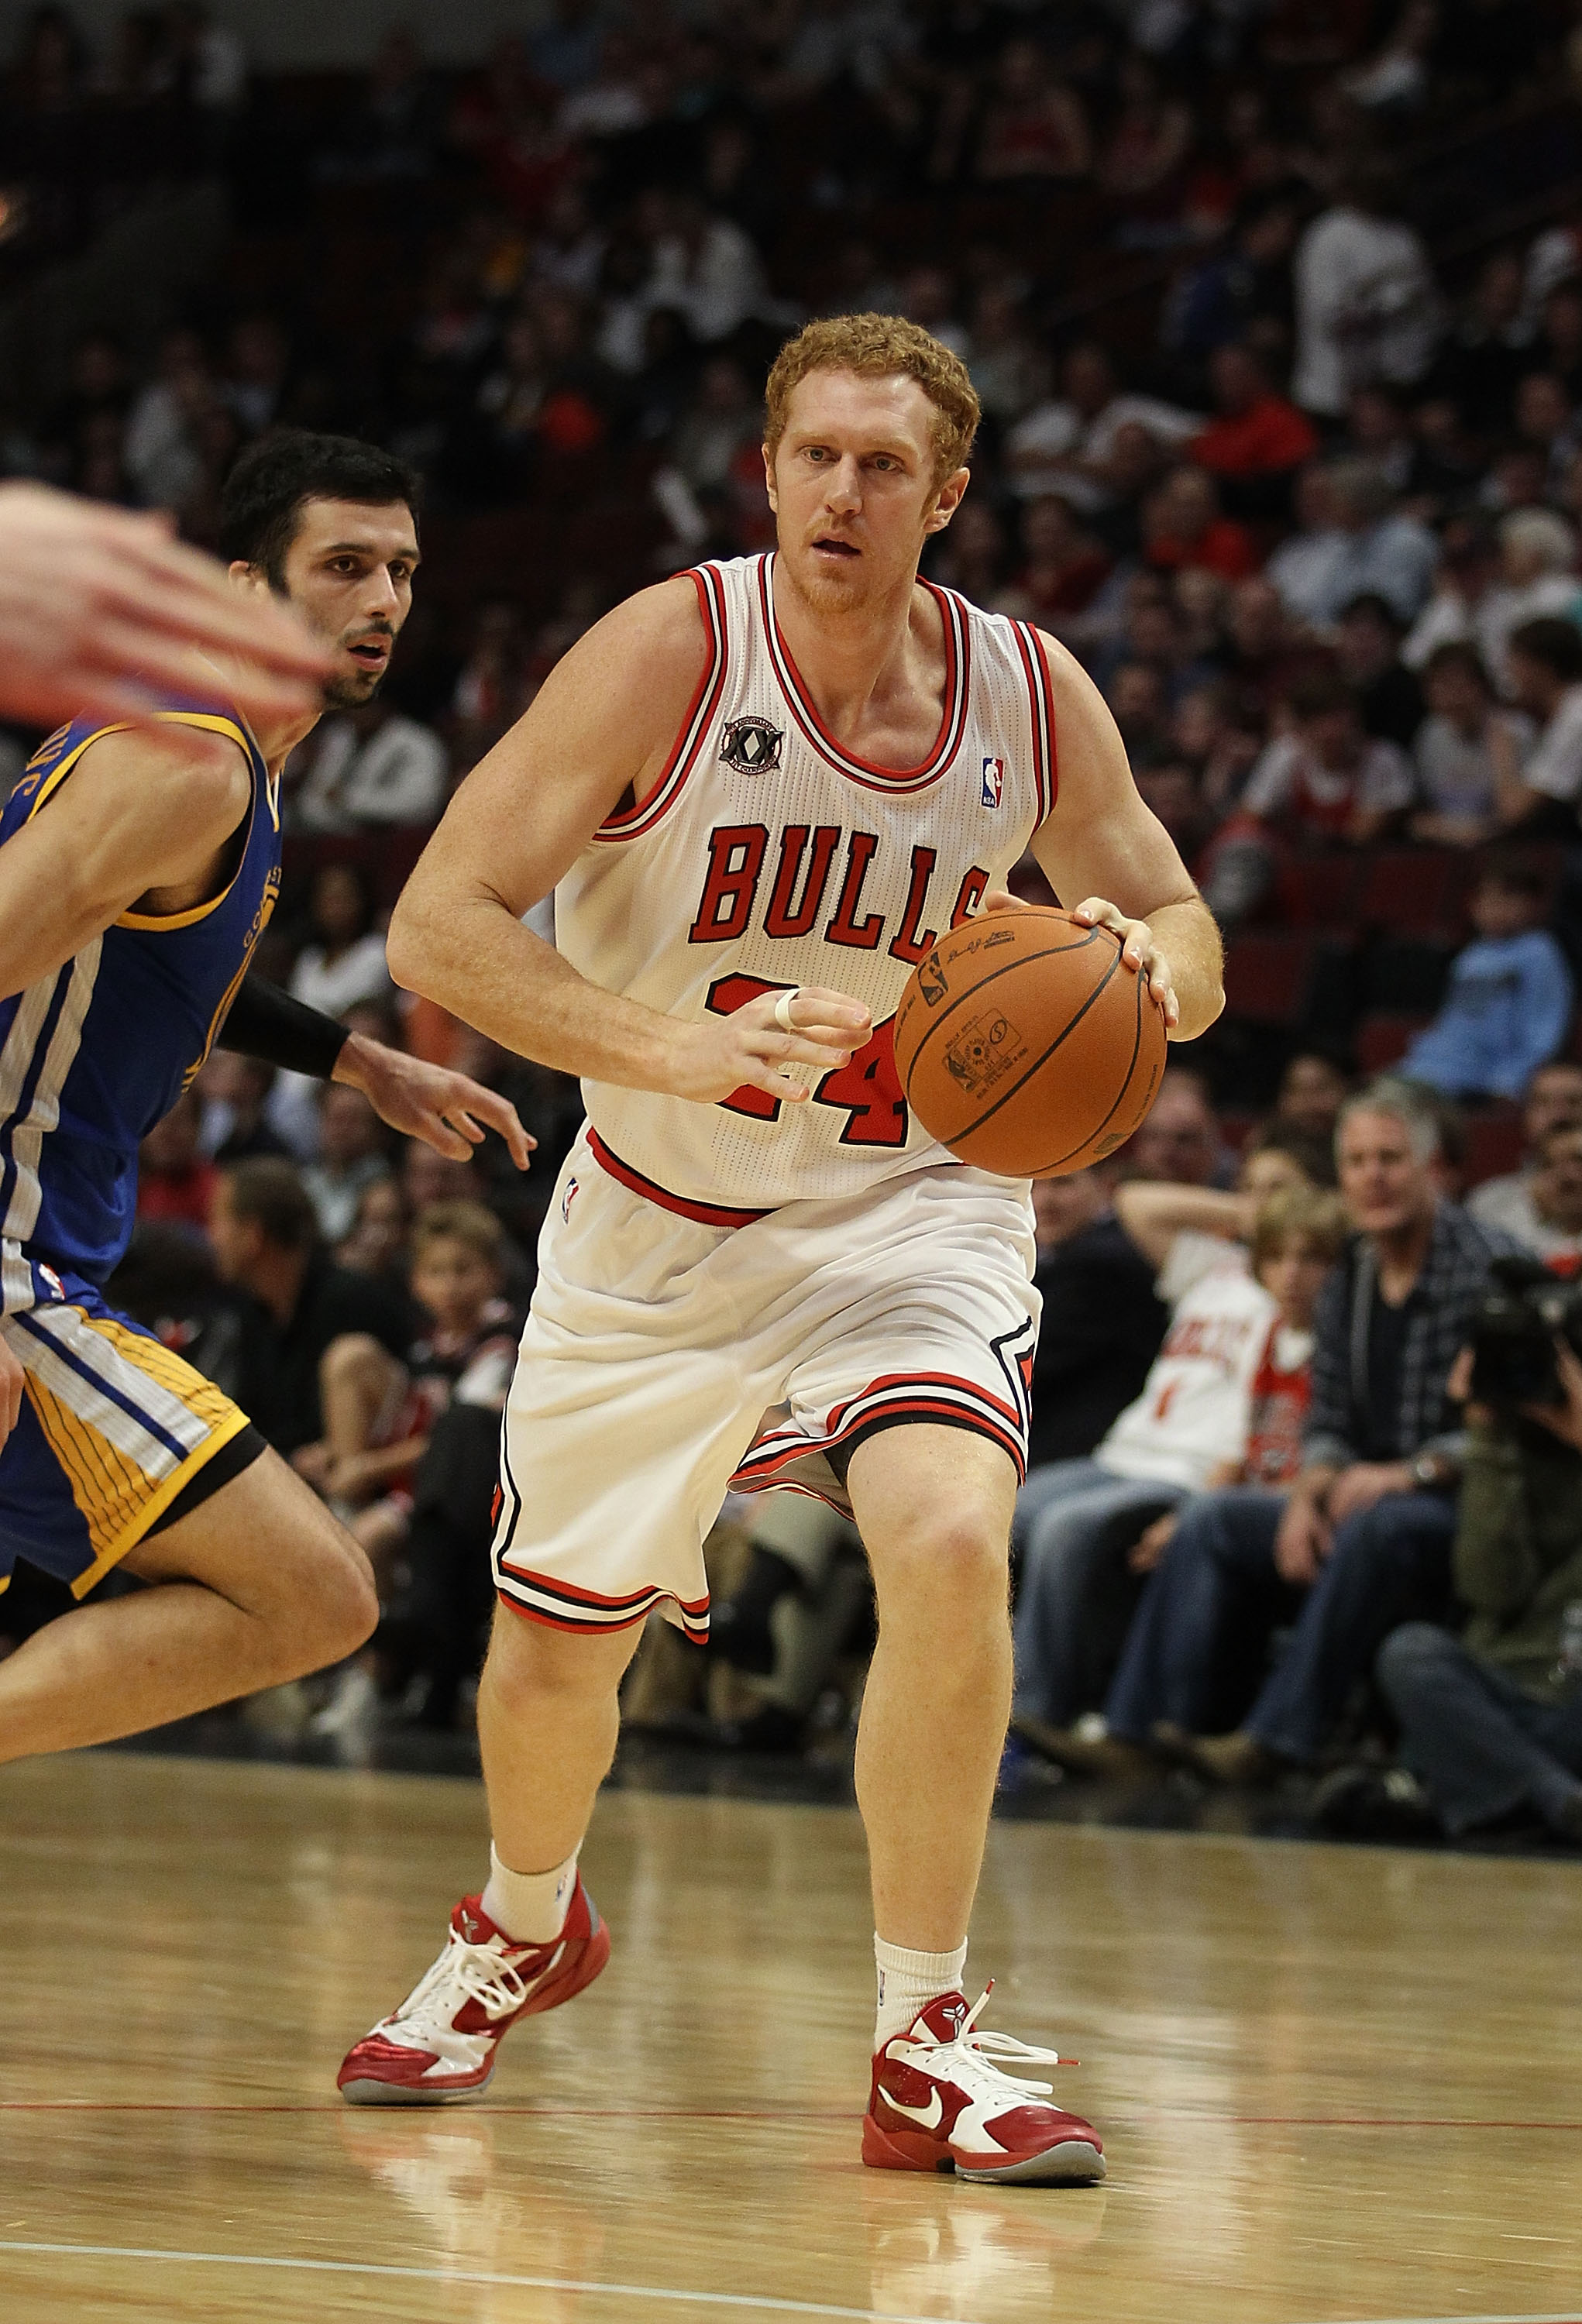 Brian Scalabrine Top 10 Plays of his Career 